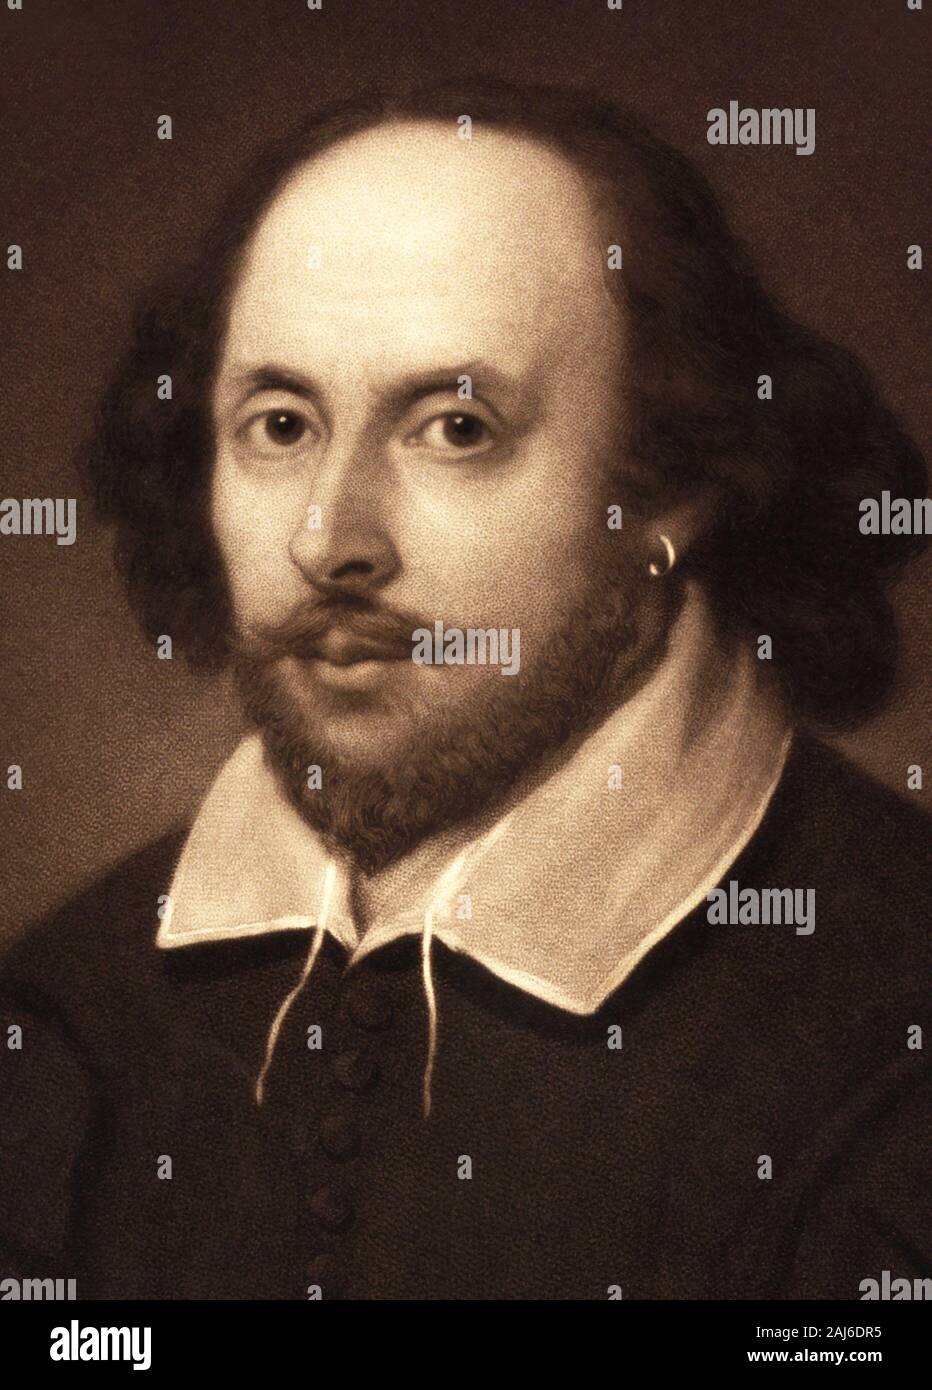 William Shakespeare (1564-1616), English playwright, poet and actor, considered by many to be the greatest writer in the English language and the world's greatest dramatist. Stock Photo